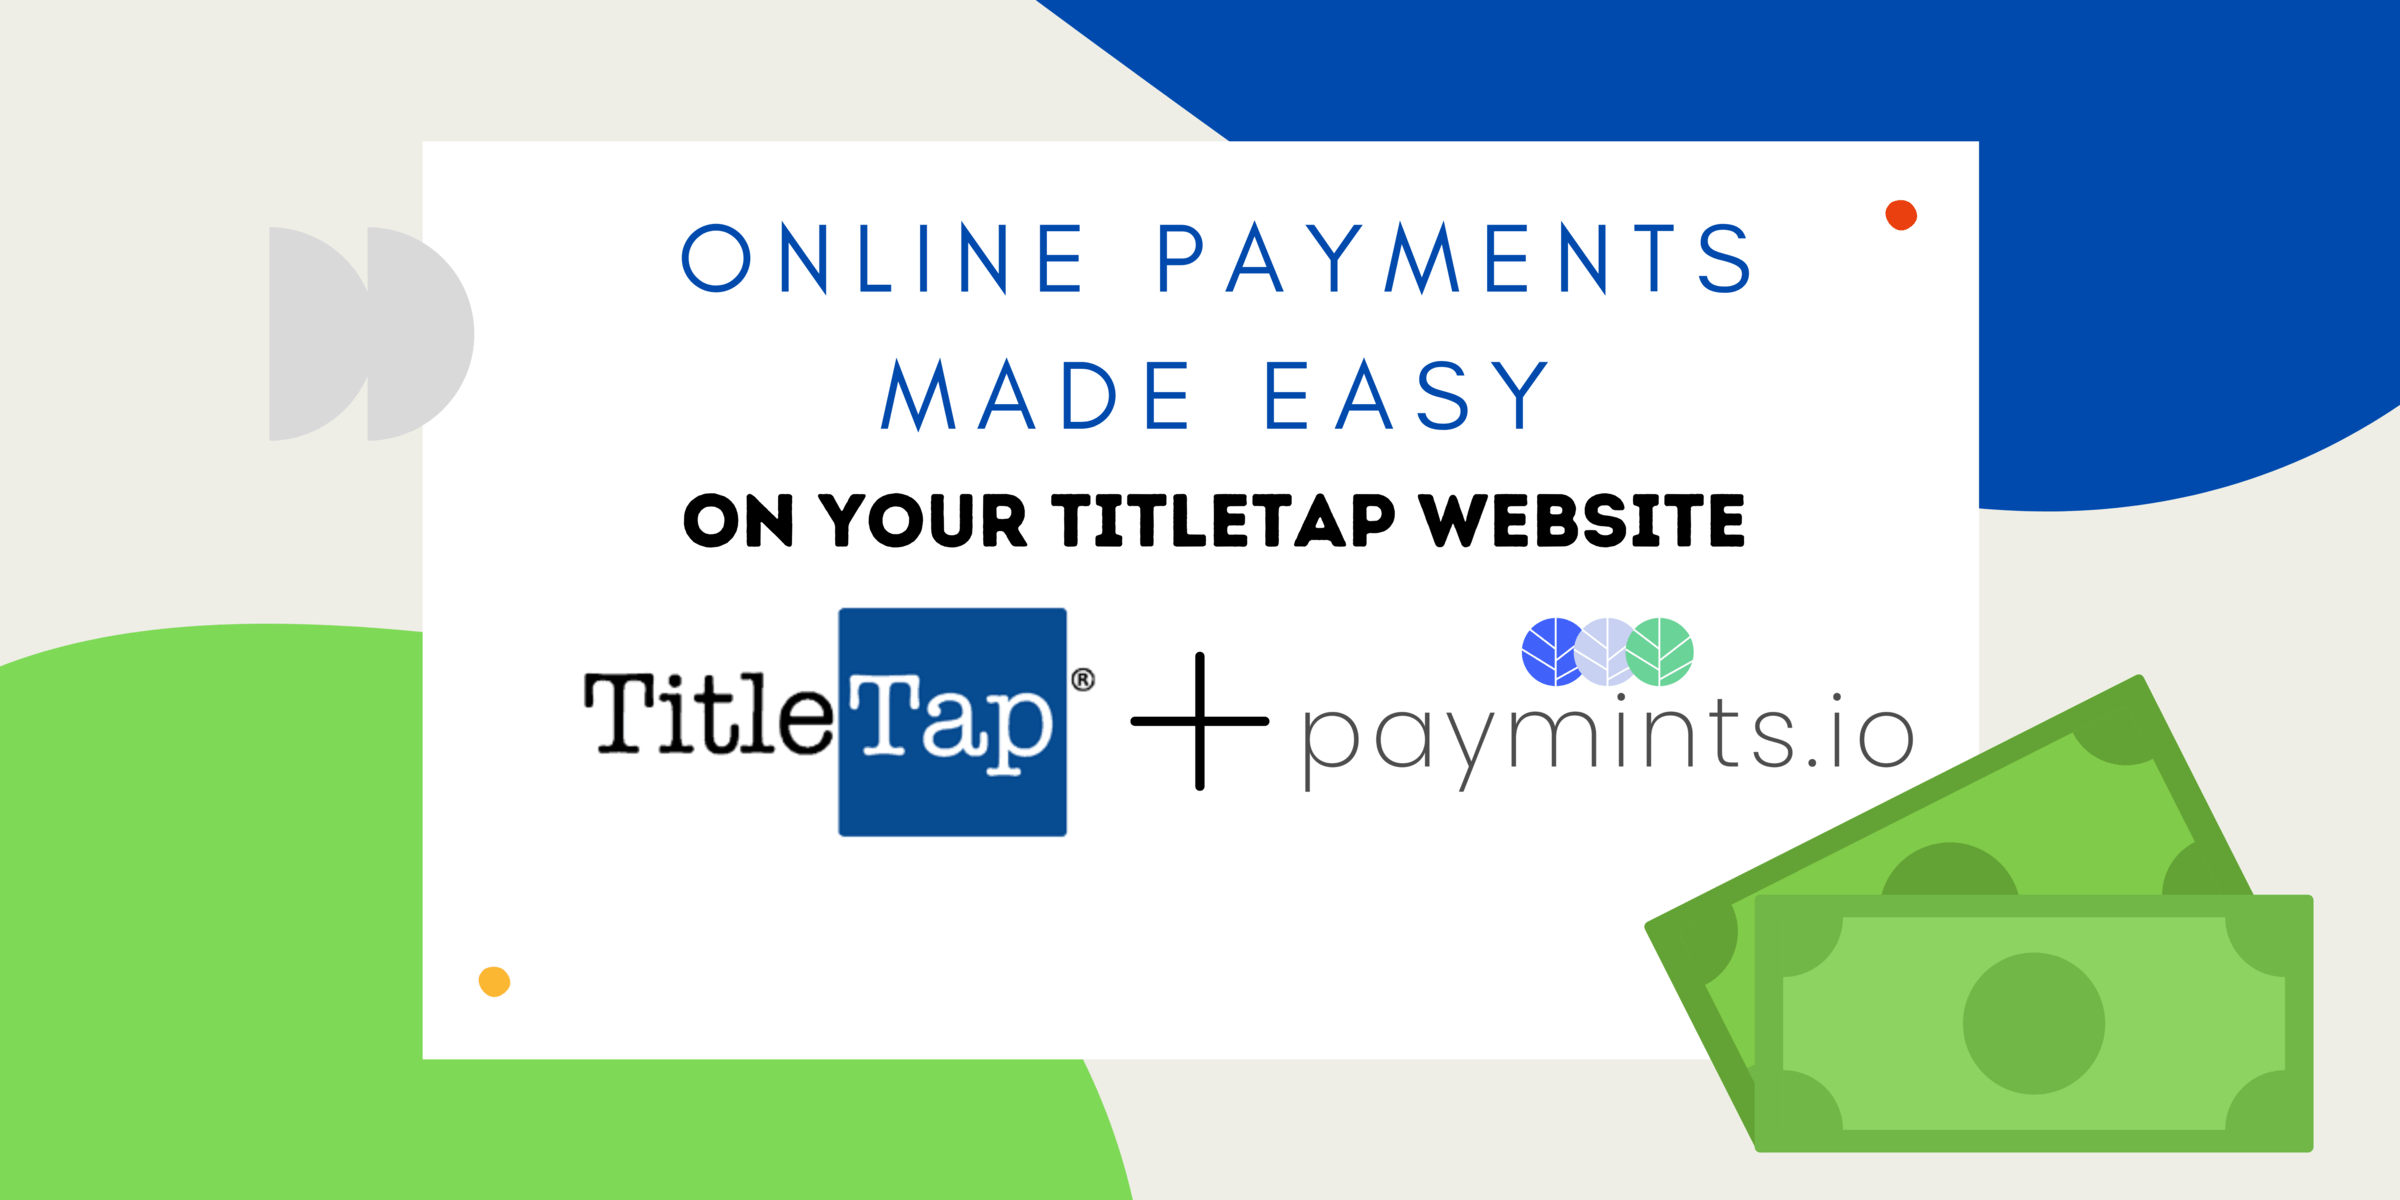 TitleTap Partners with Paymints.io on Online Payment Website Integration